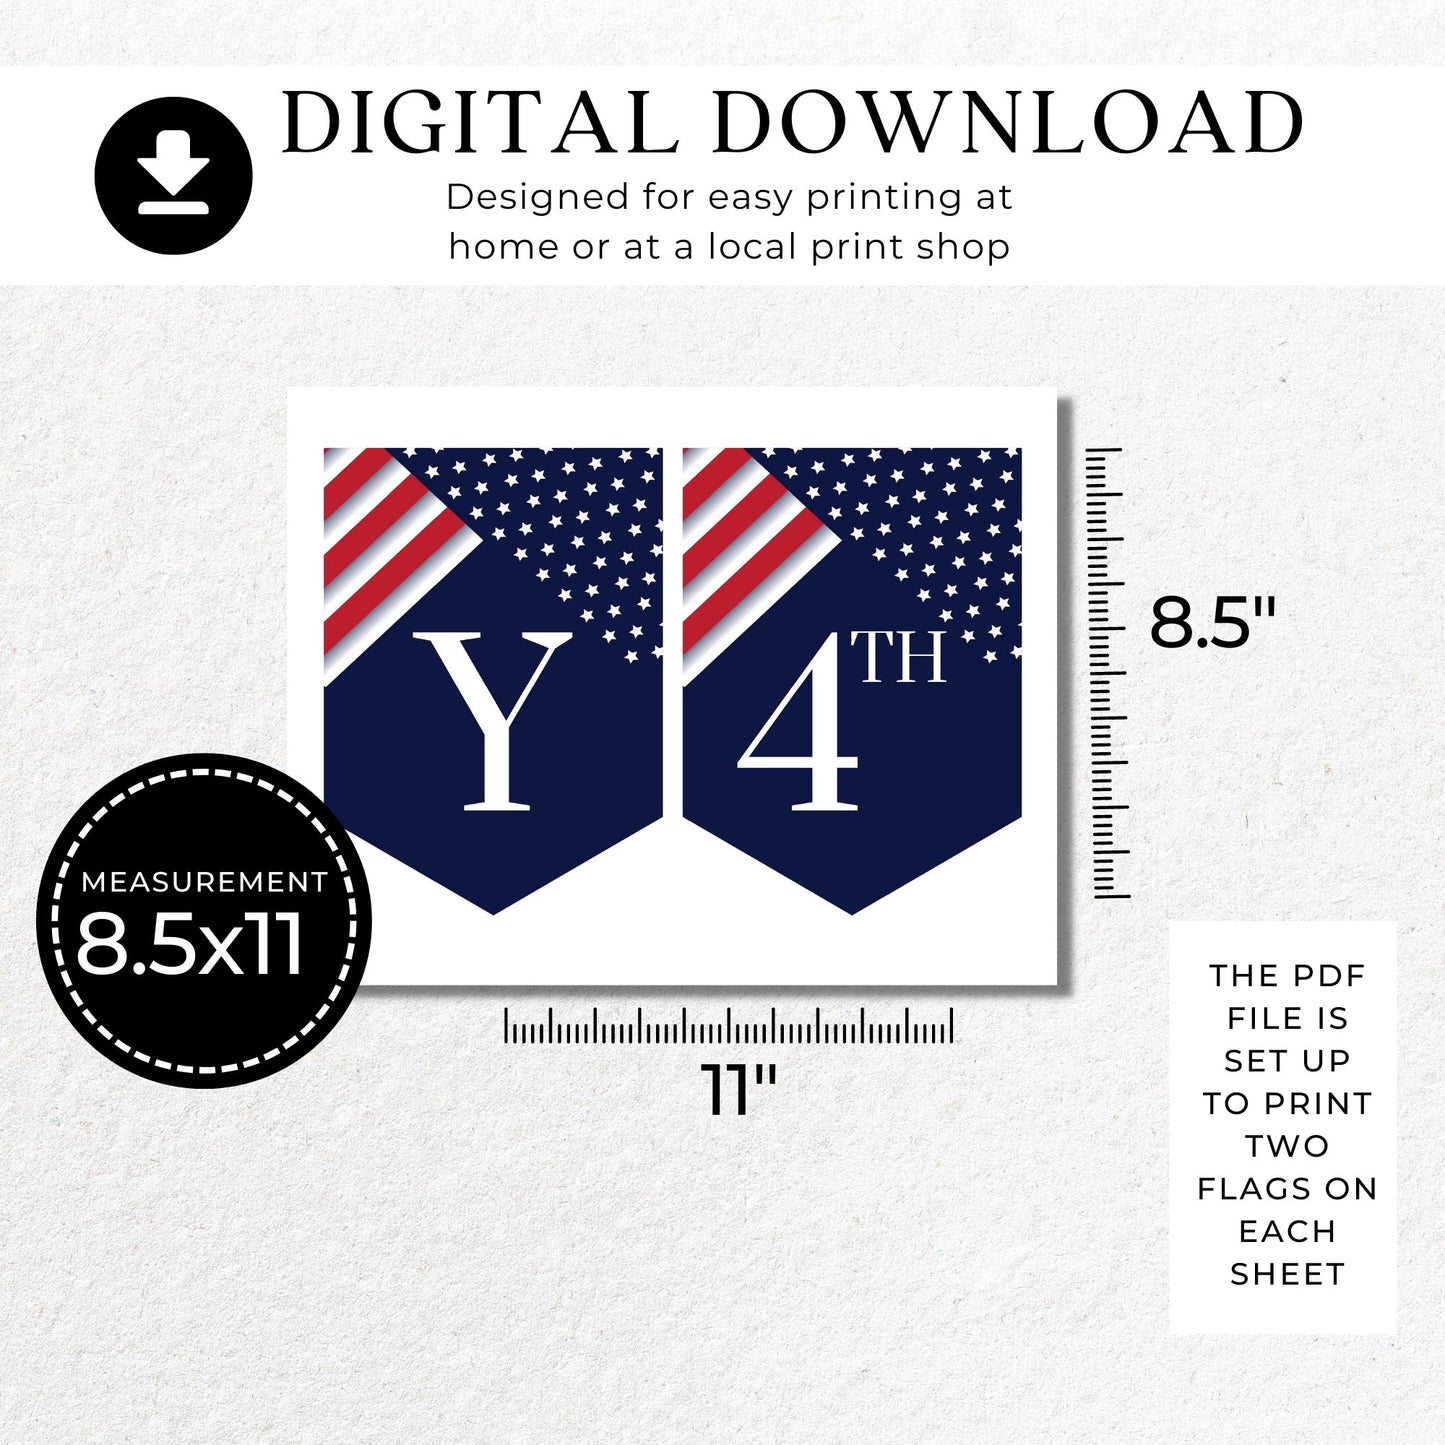 Happy 4th of July Banner PDF